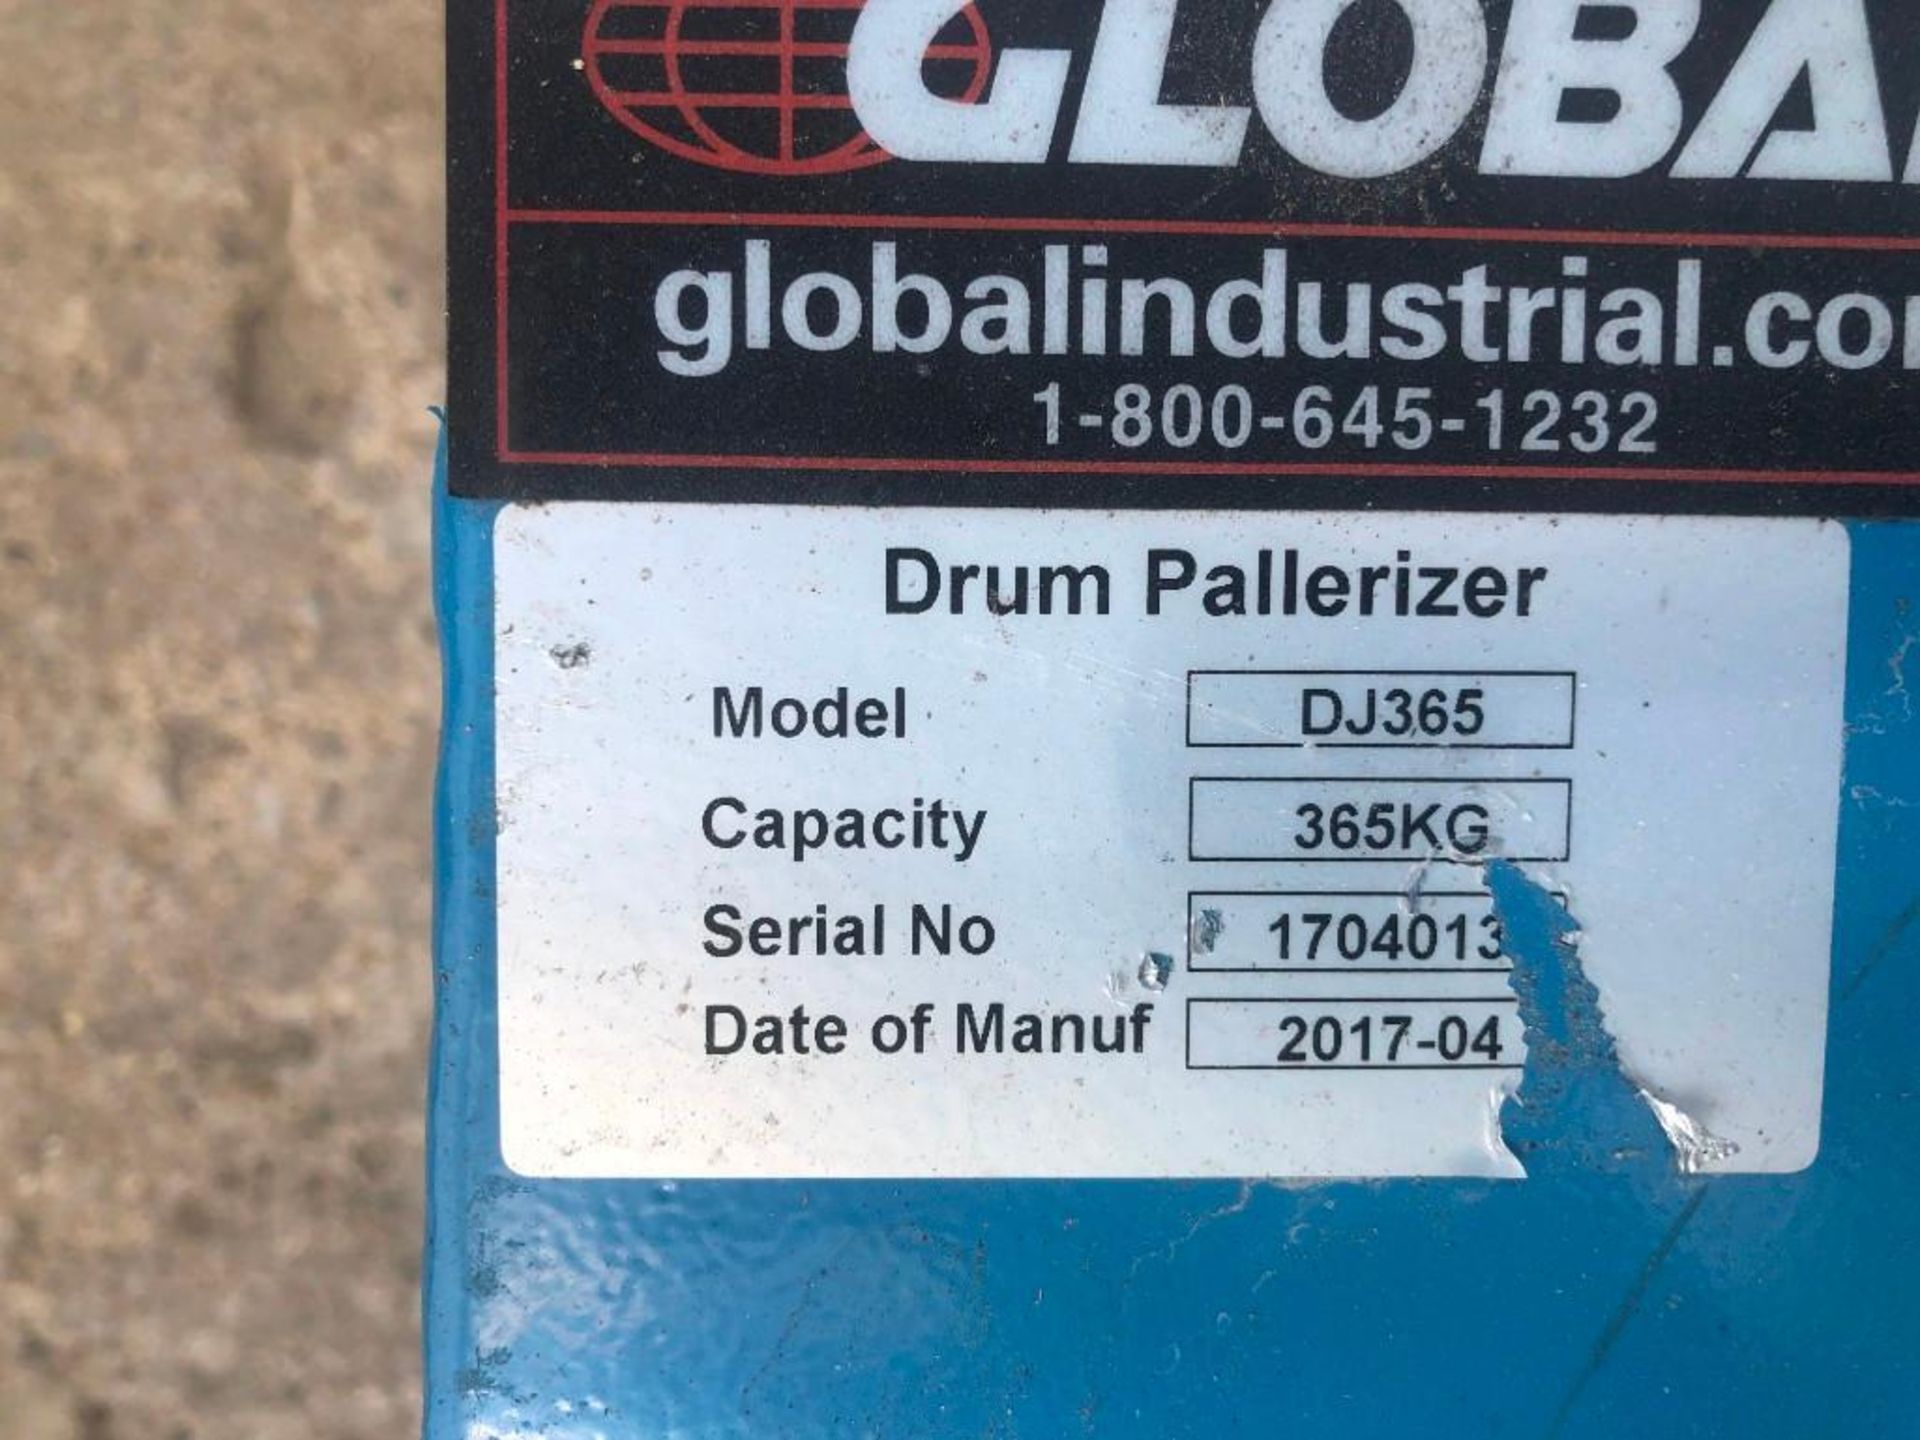 GLOBAL Drum Palletizer, Serial #1704013, Model DJ365, 365 KG Capacity. Located at 301 E Henry - Image 3 of 3